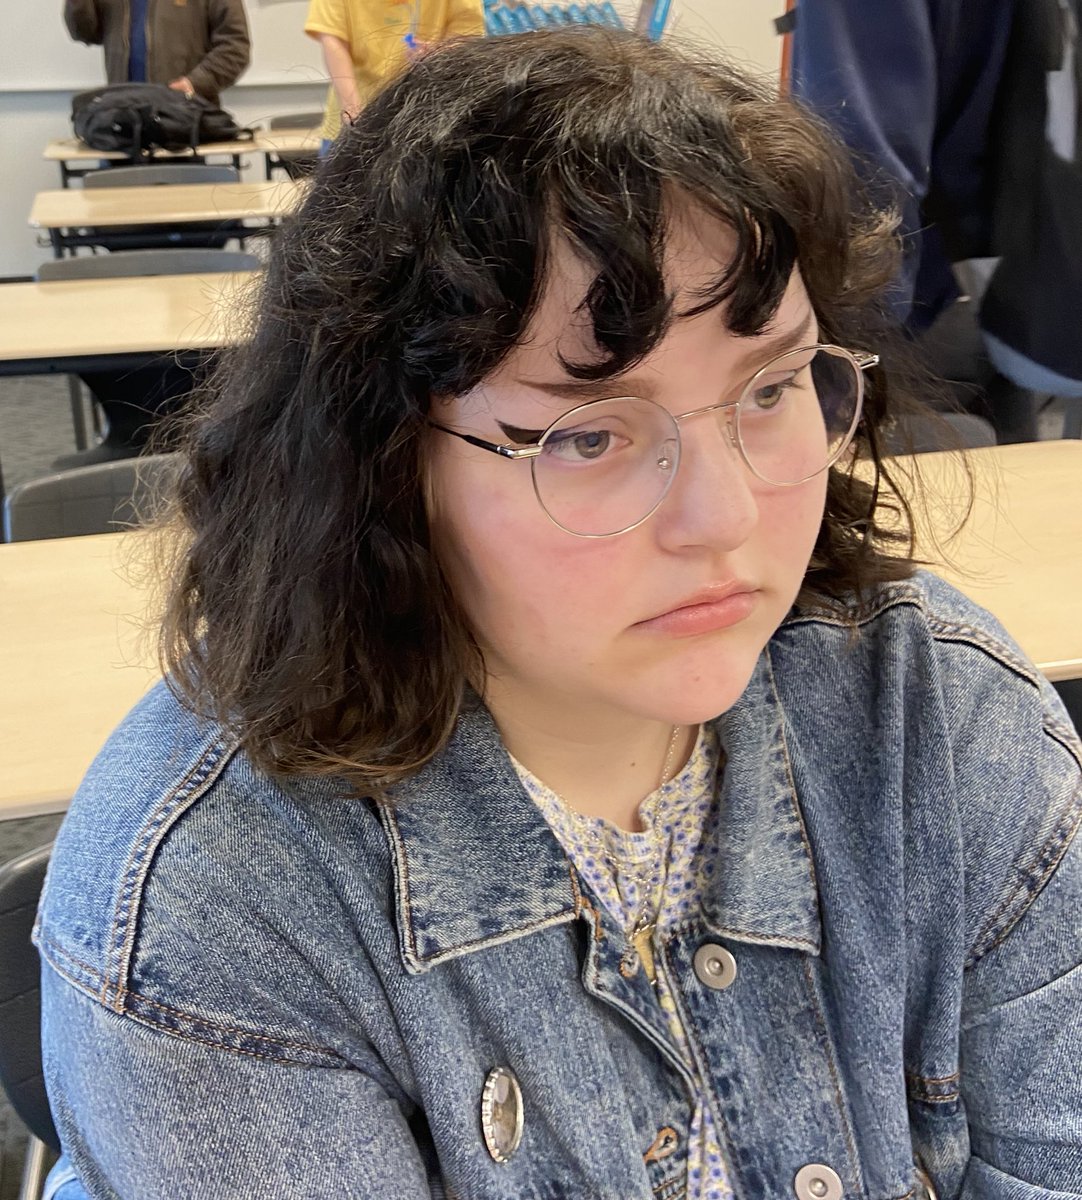 day 112: my friend took this picture of me and i cant believe my resting face looks that sad